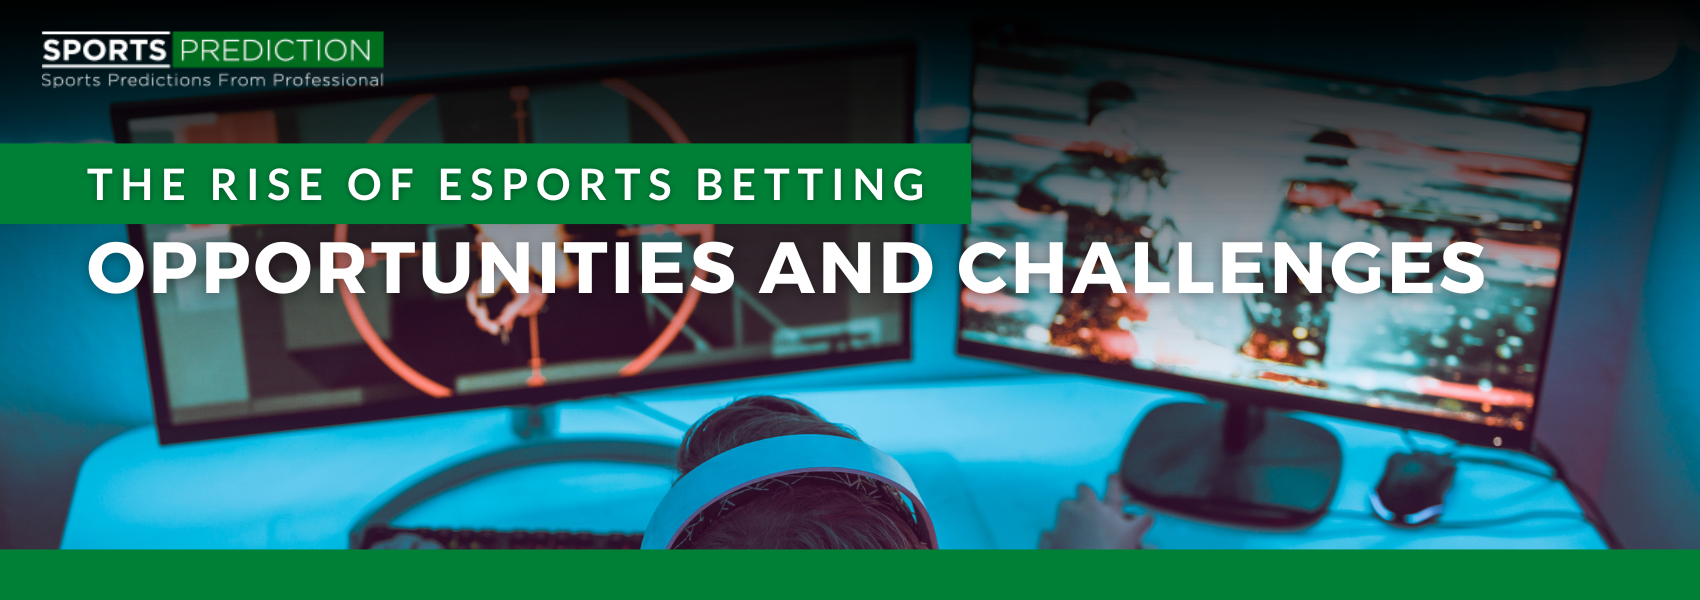 The Rise Of Esports Betting: Opportunities And Challenges